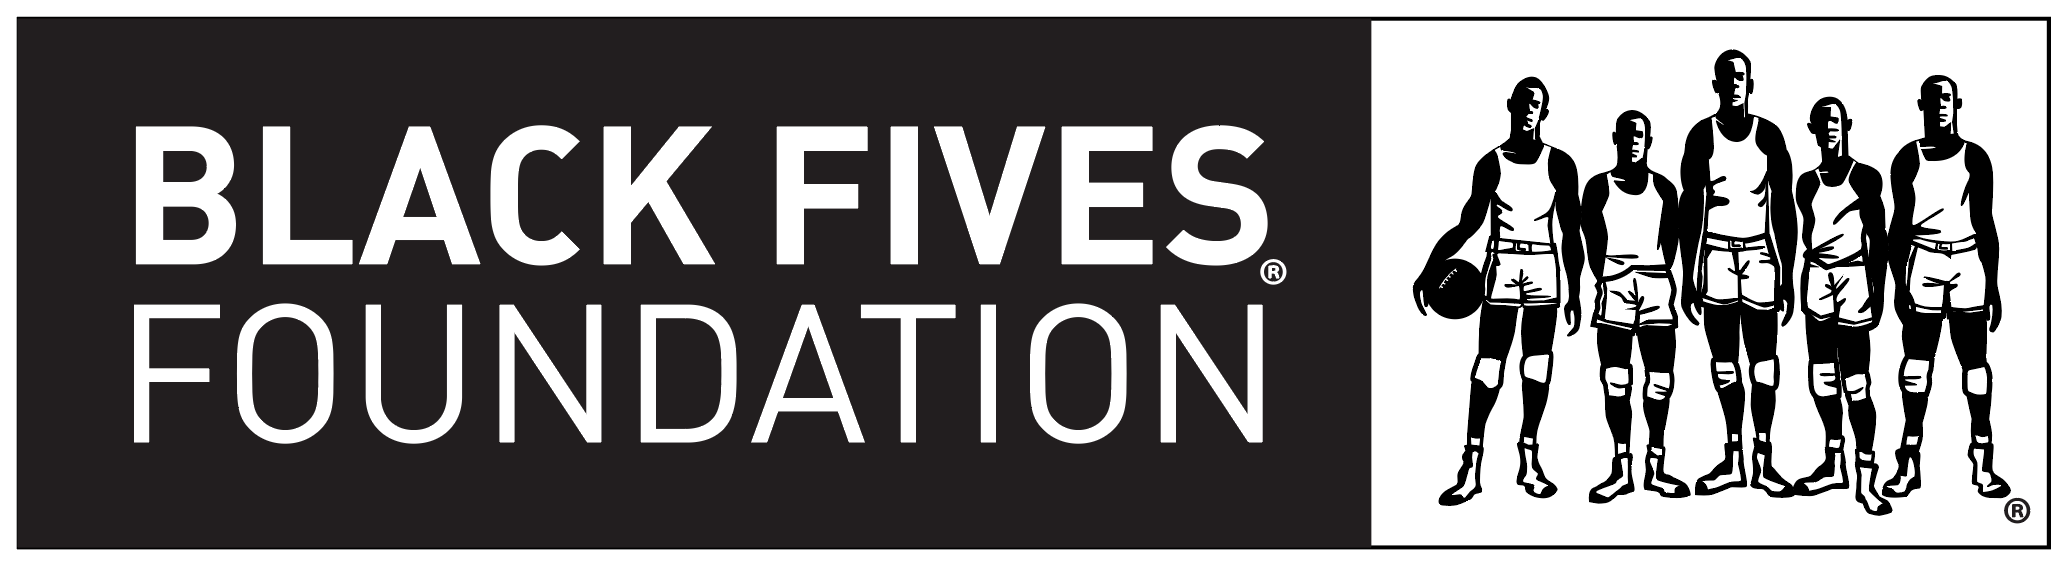 The Black Fives Foundation